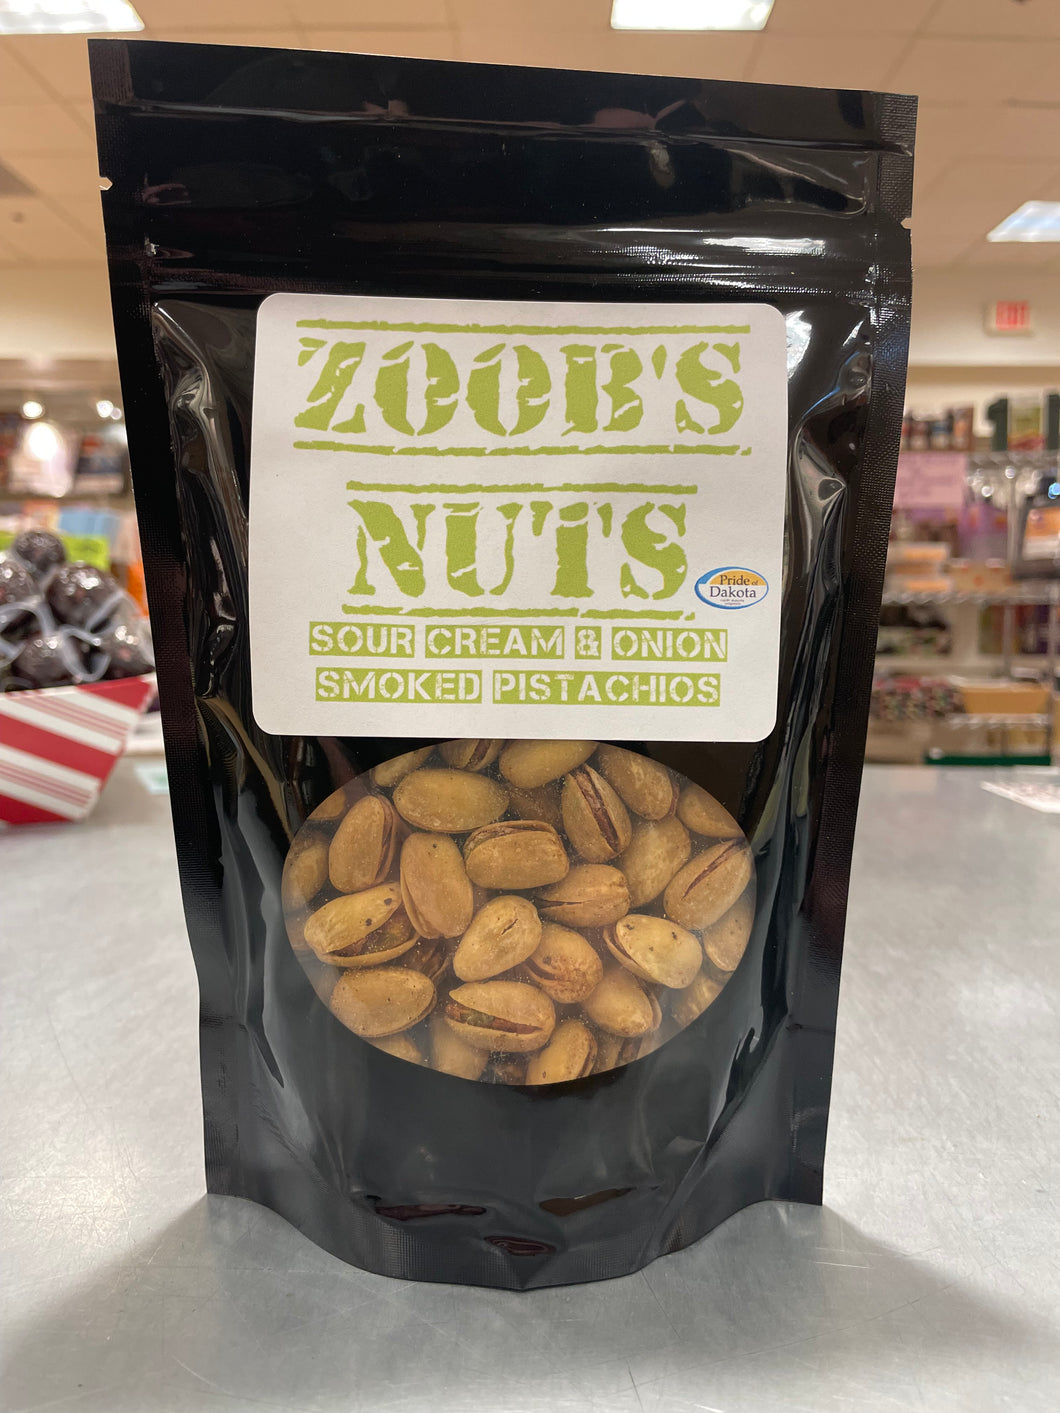 Zoobs Sour Cream and Onion Smoked Pistachios